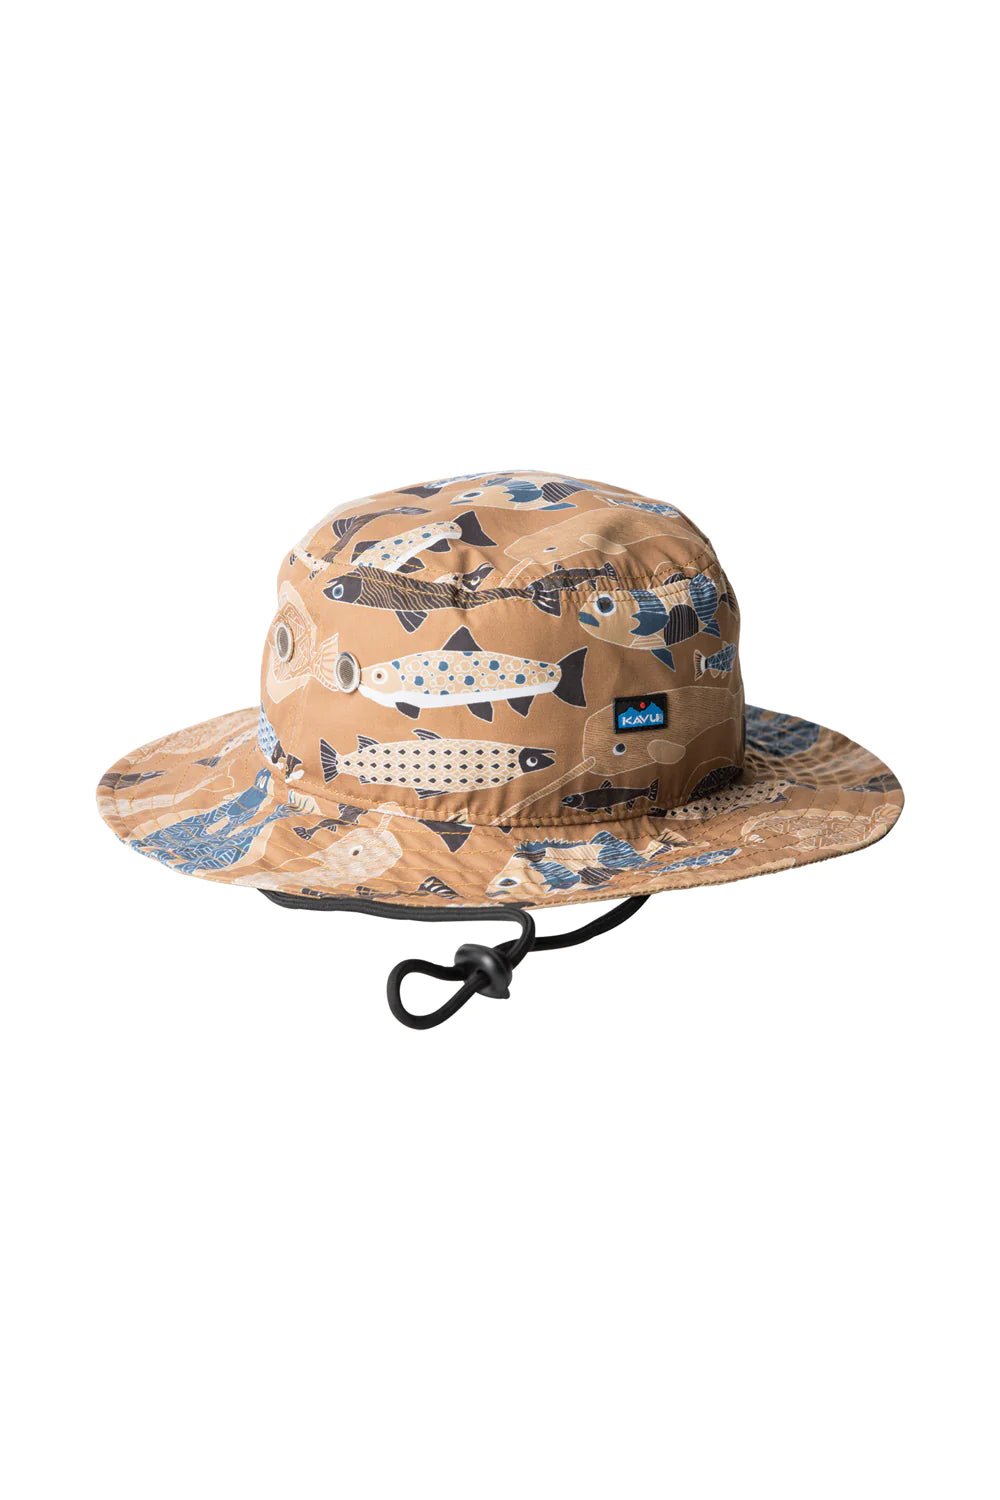 Boone Mountain Sports - BFE HAT